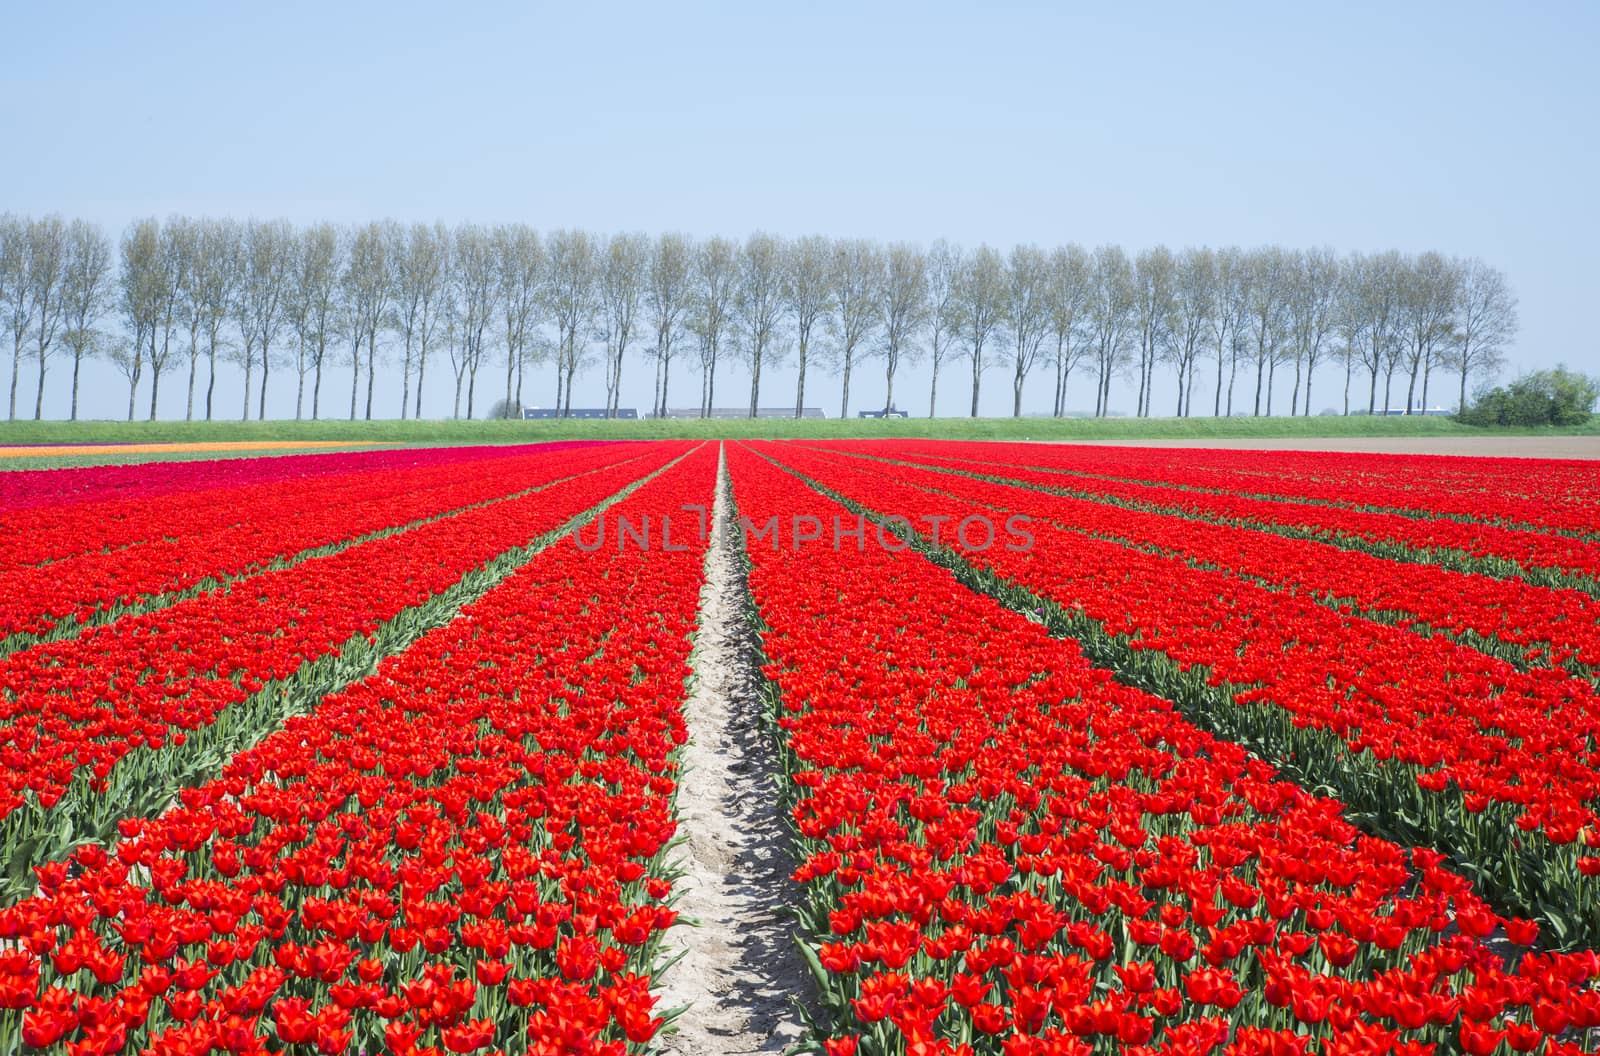 filed of red tulips in holland on goeree with trees at the background in holland